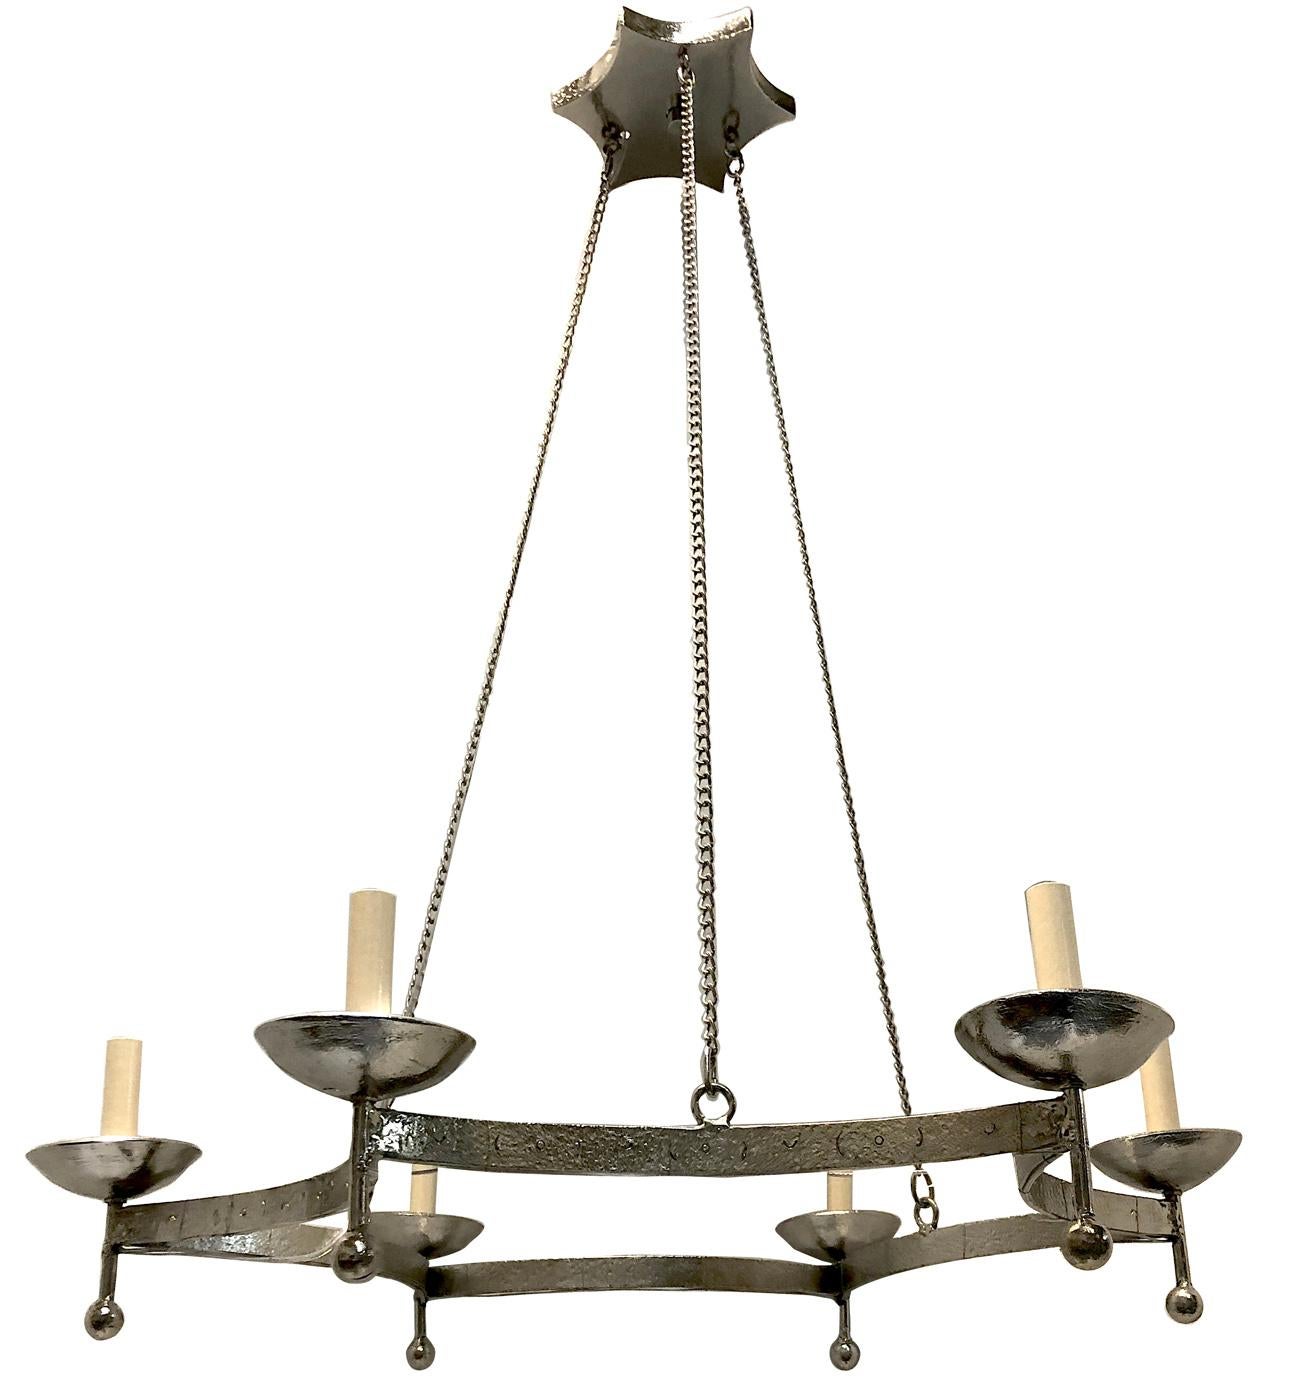 A pair of circa 1940's Italian hammered and silver plated light fixtures with 6 candelabra lights. Sold Individually

Measurements:
Current drop 42